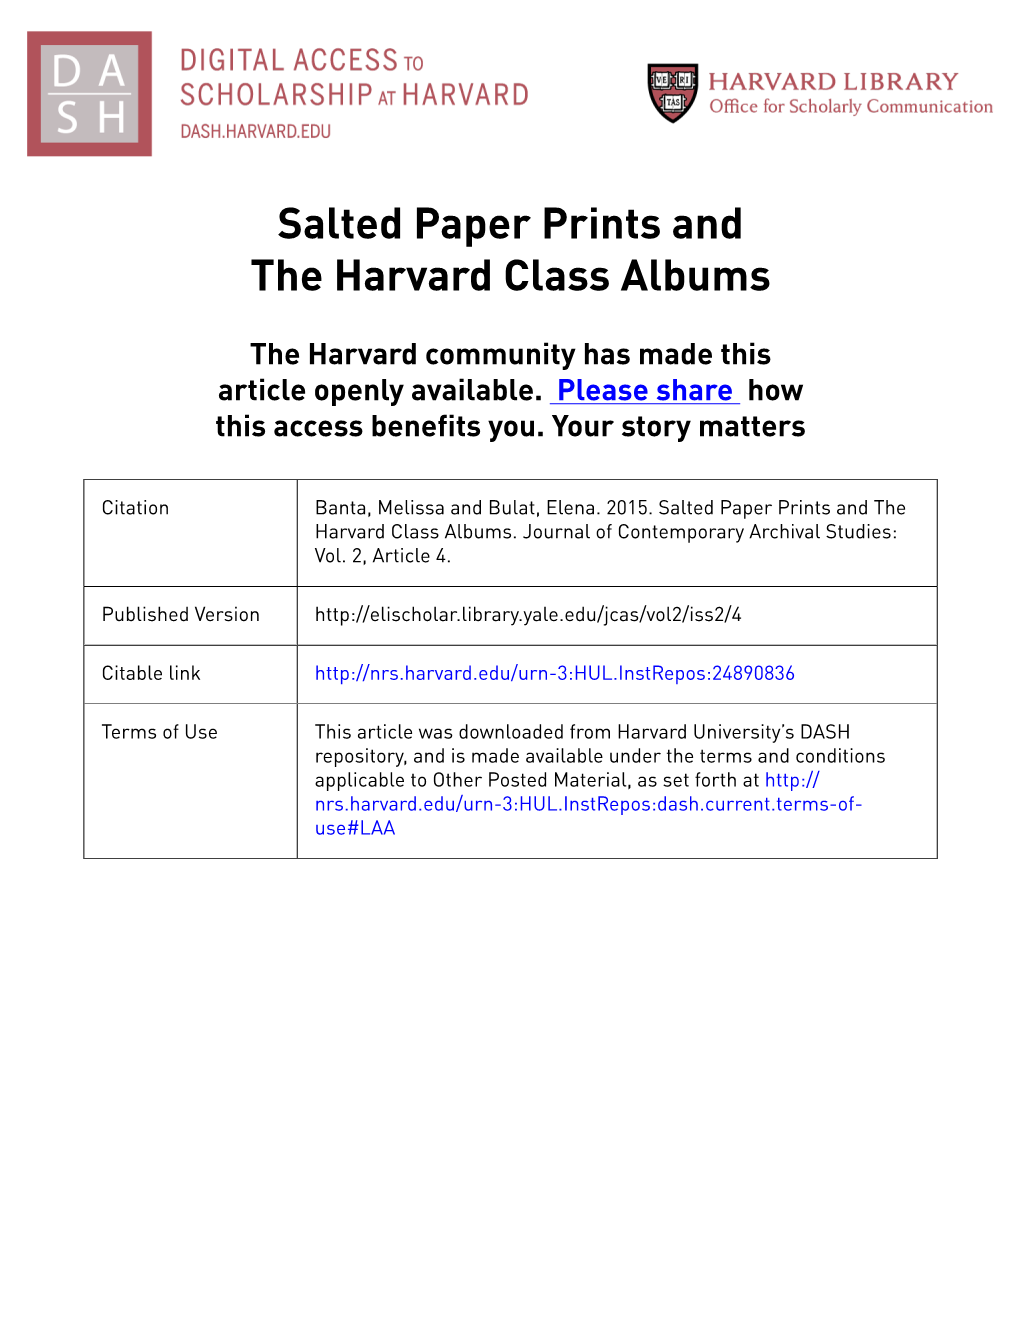 Salted Paper Prints and the Harvard Class Albums